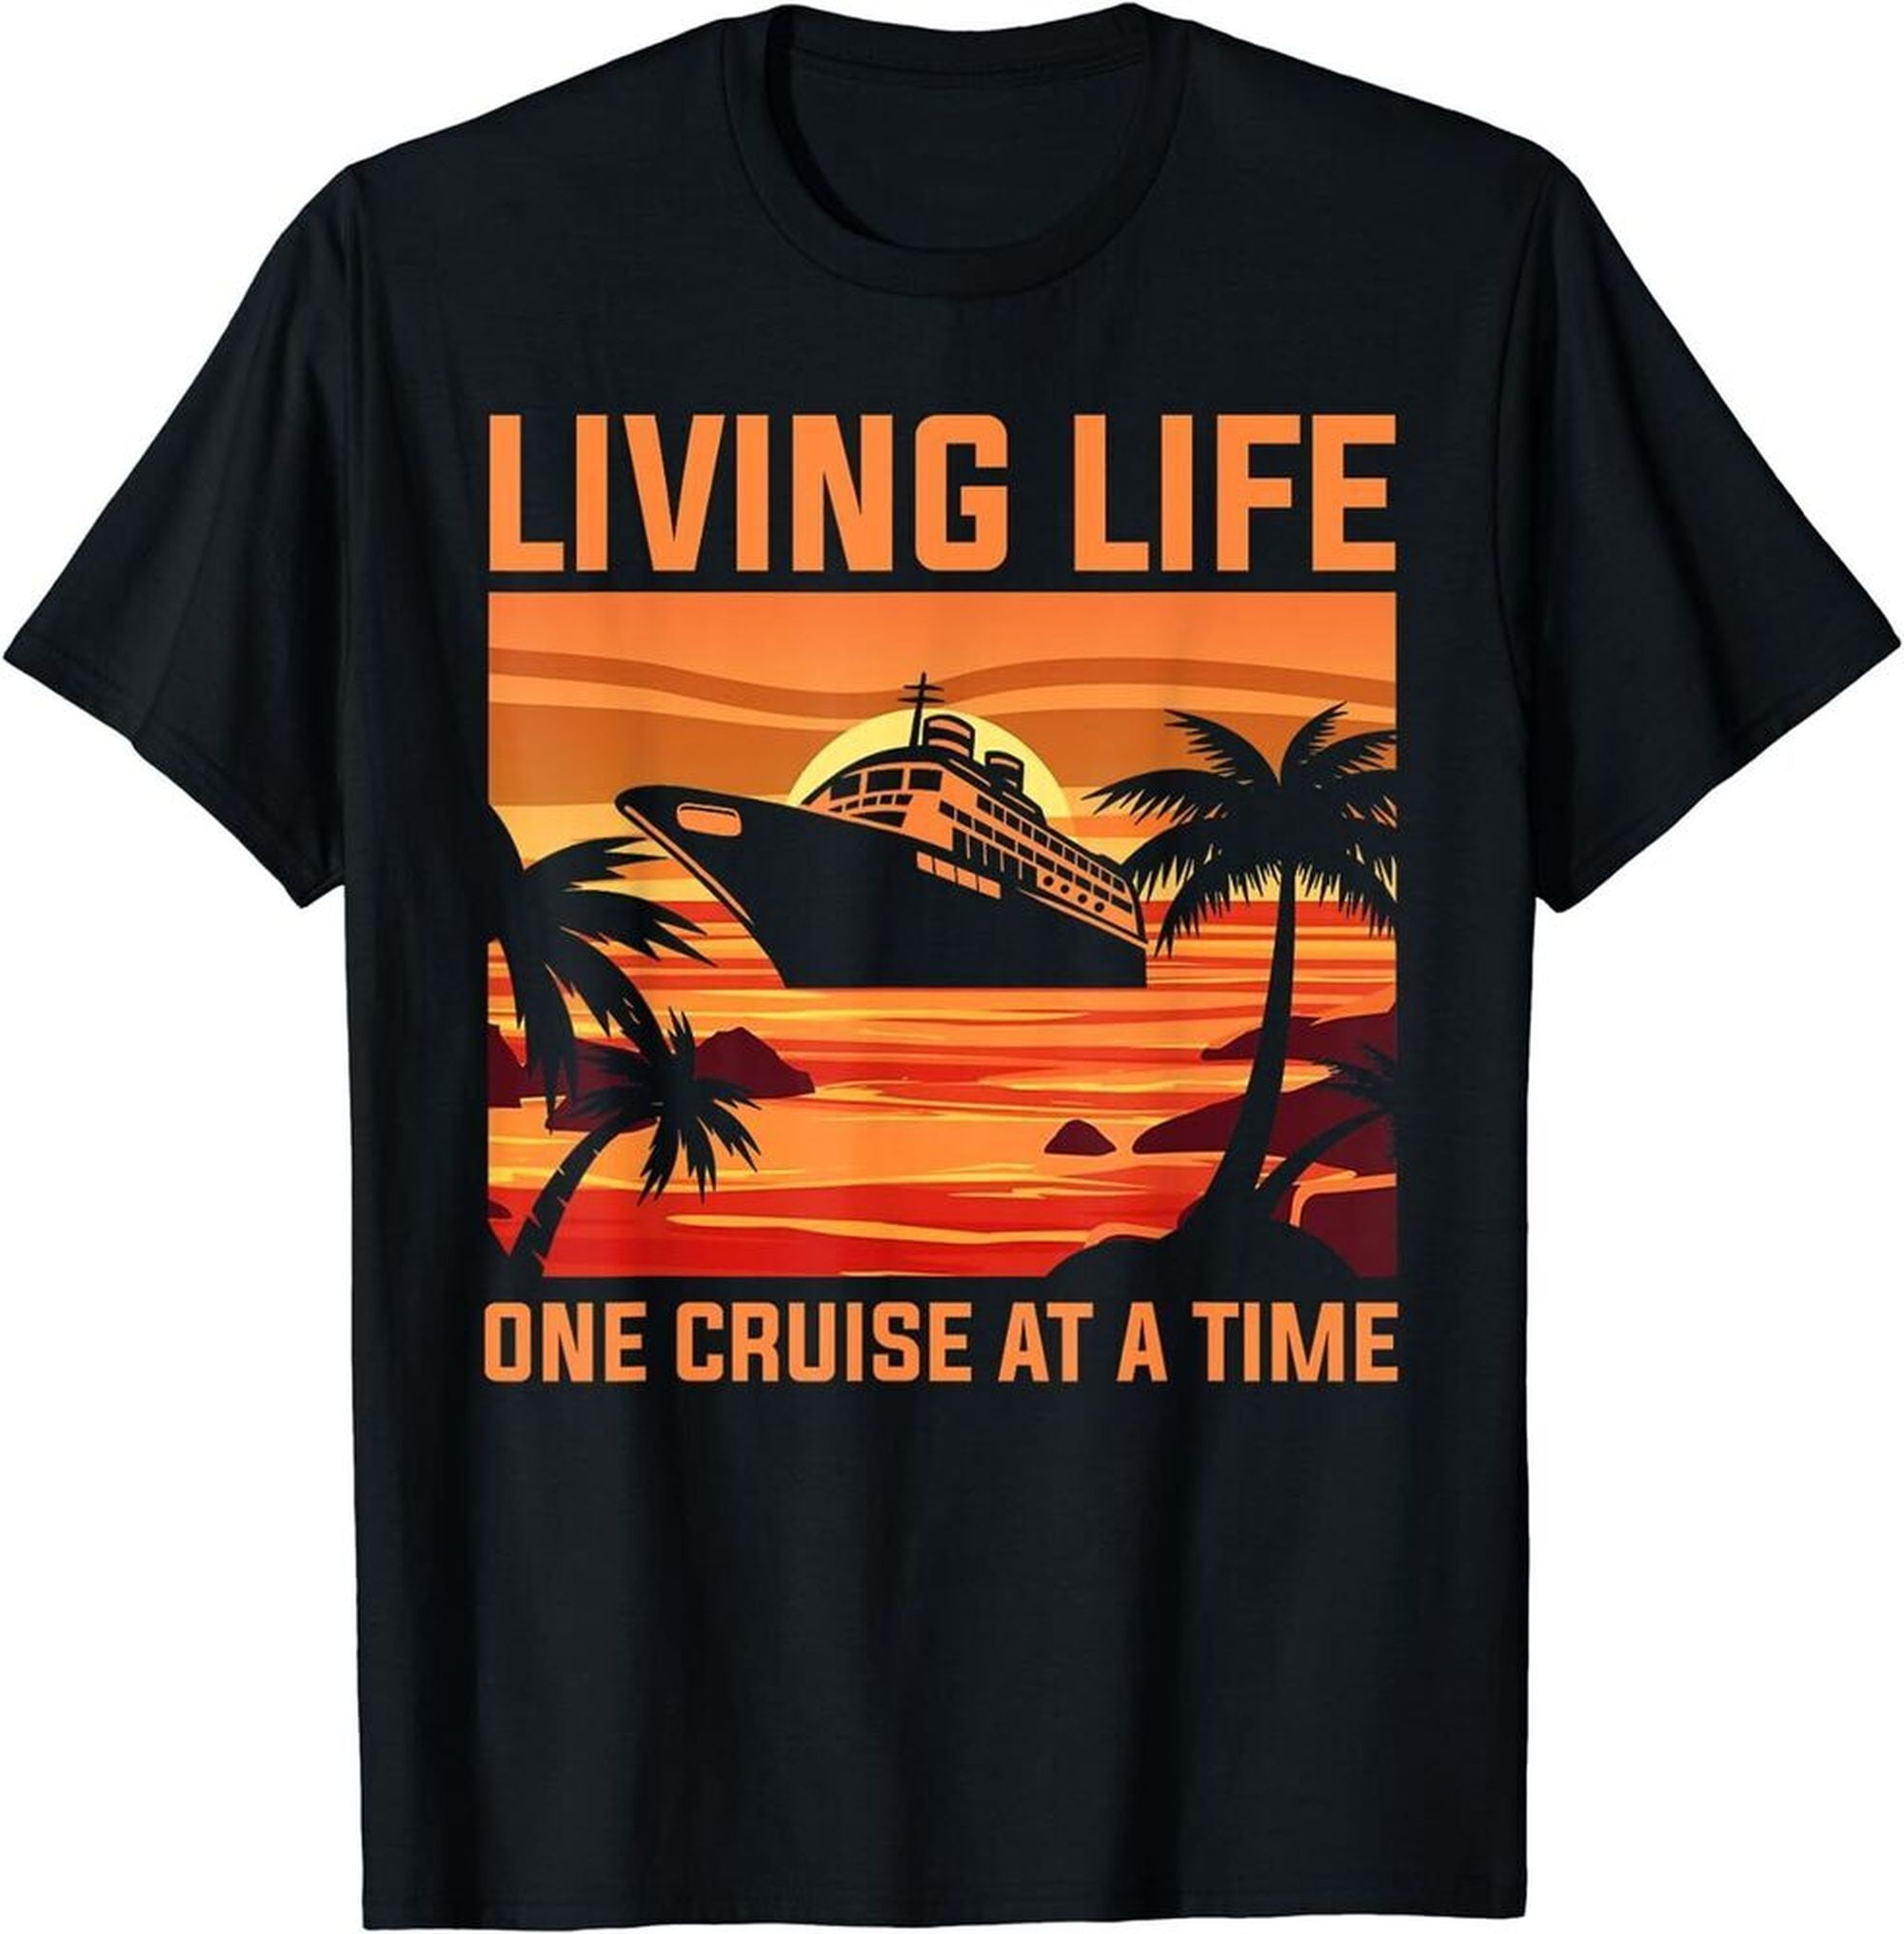 Fun-filled Cruise Ship T-Shirt for Cruise Lovers - Ideal for Men and ...